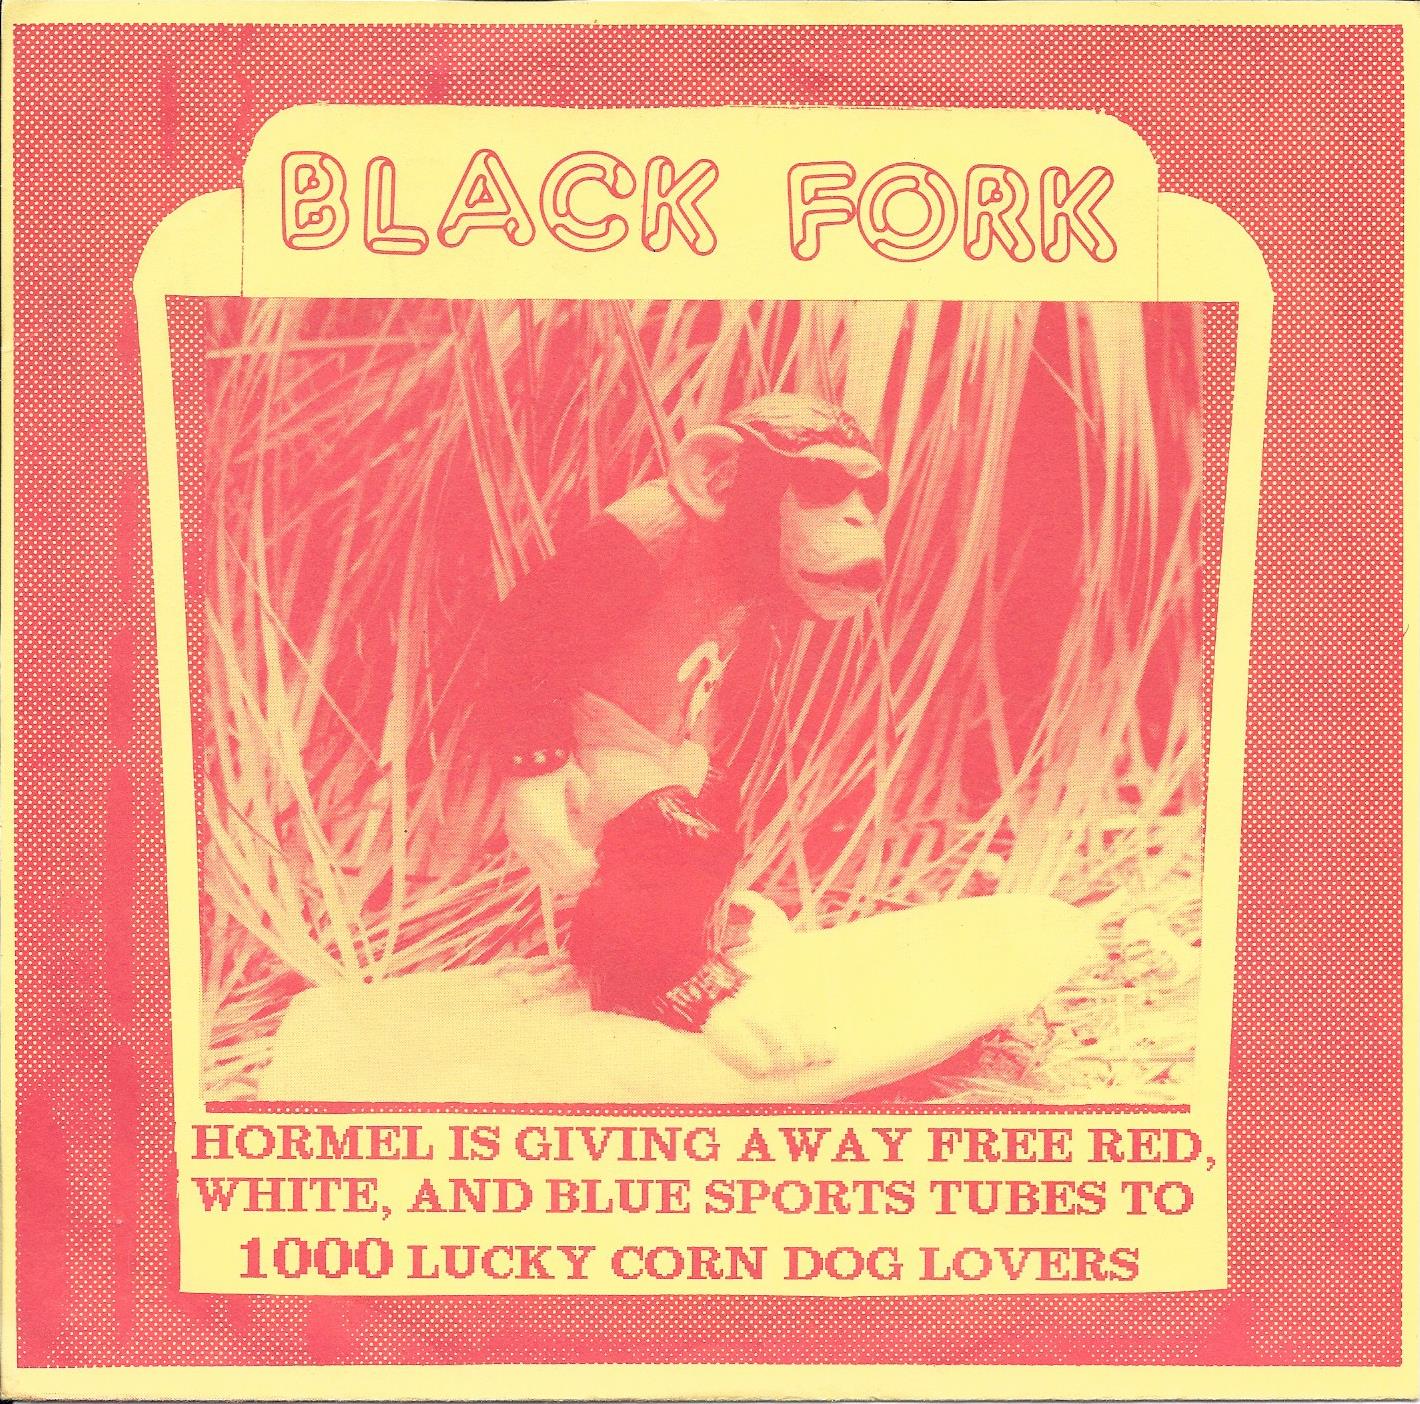 The Daily Orca-All My Records-Black Fork-Hormel